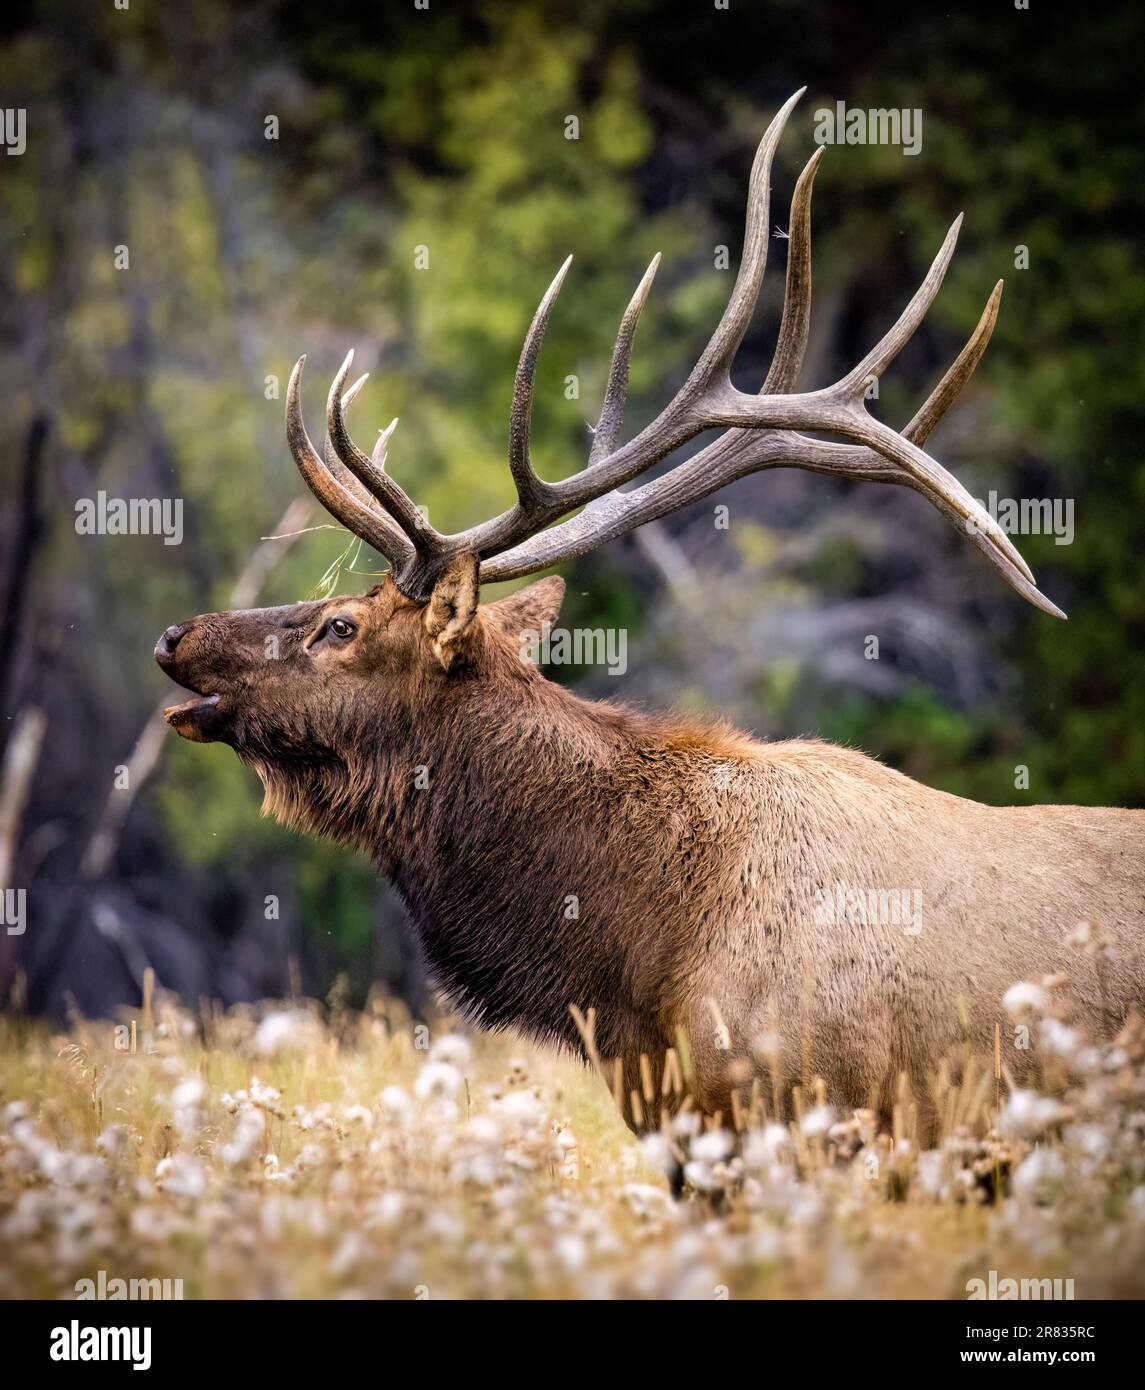 Bull Rocky mountain elk (cervus canadensis) bugling in grass meadow during fall elk rut at moraine park, Rocky Mountain National Park, Colorado, USA Stock Photo